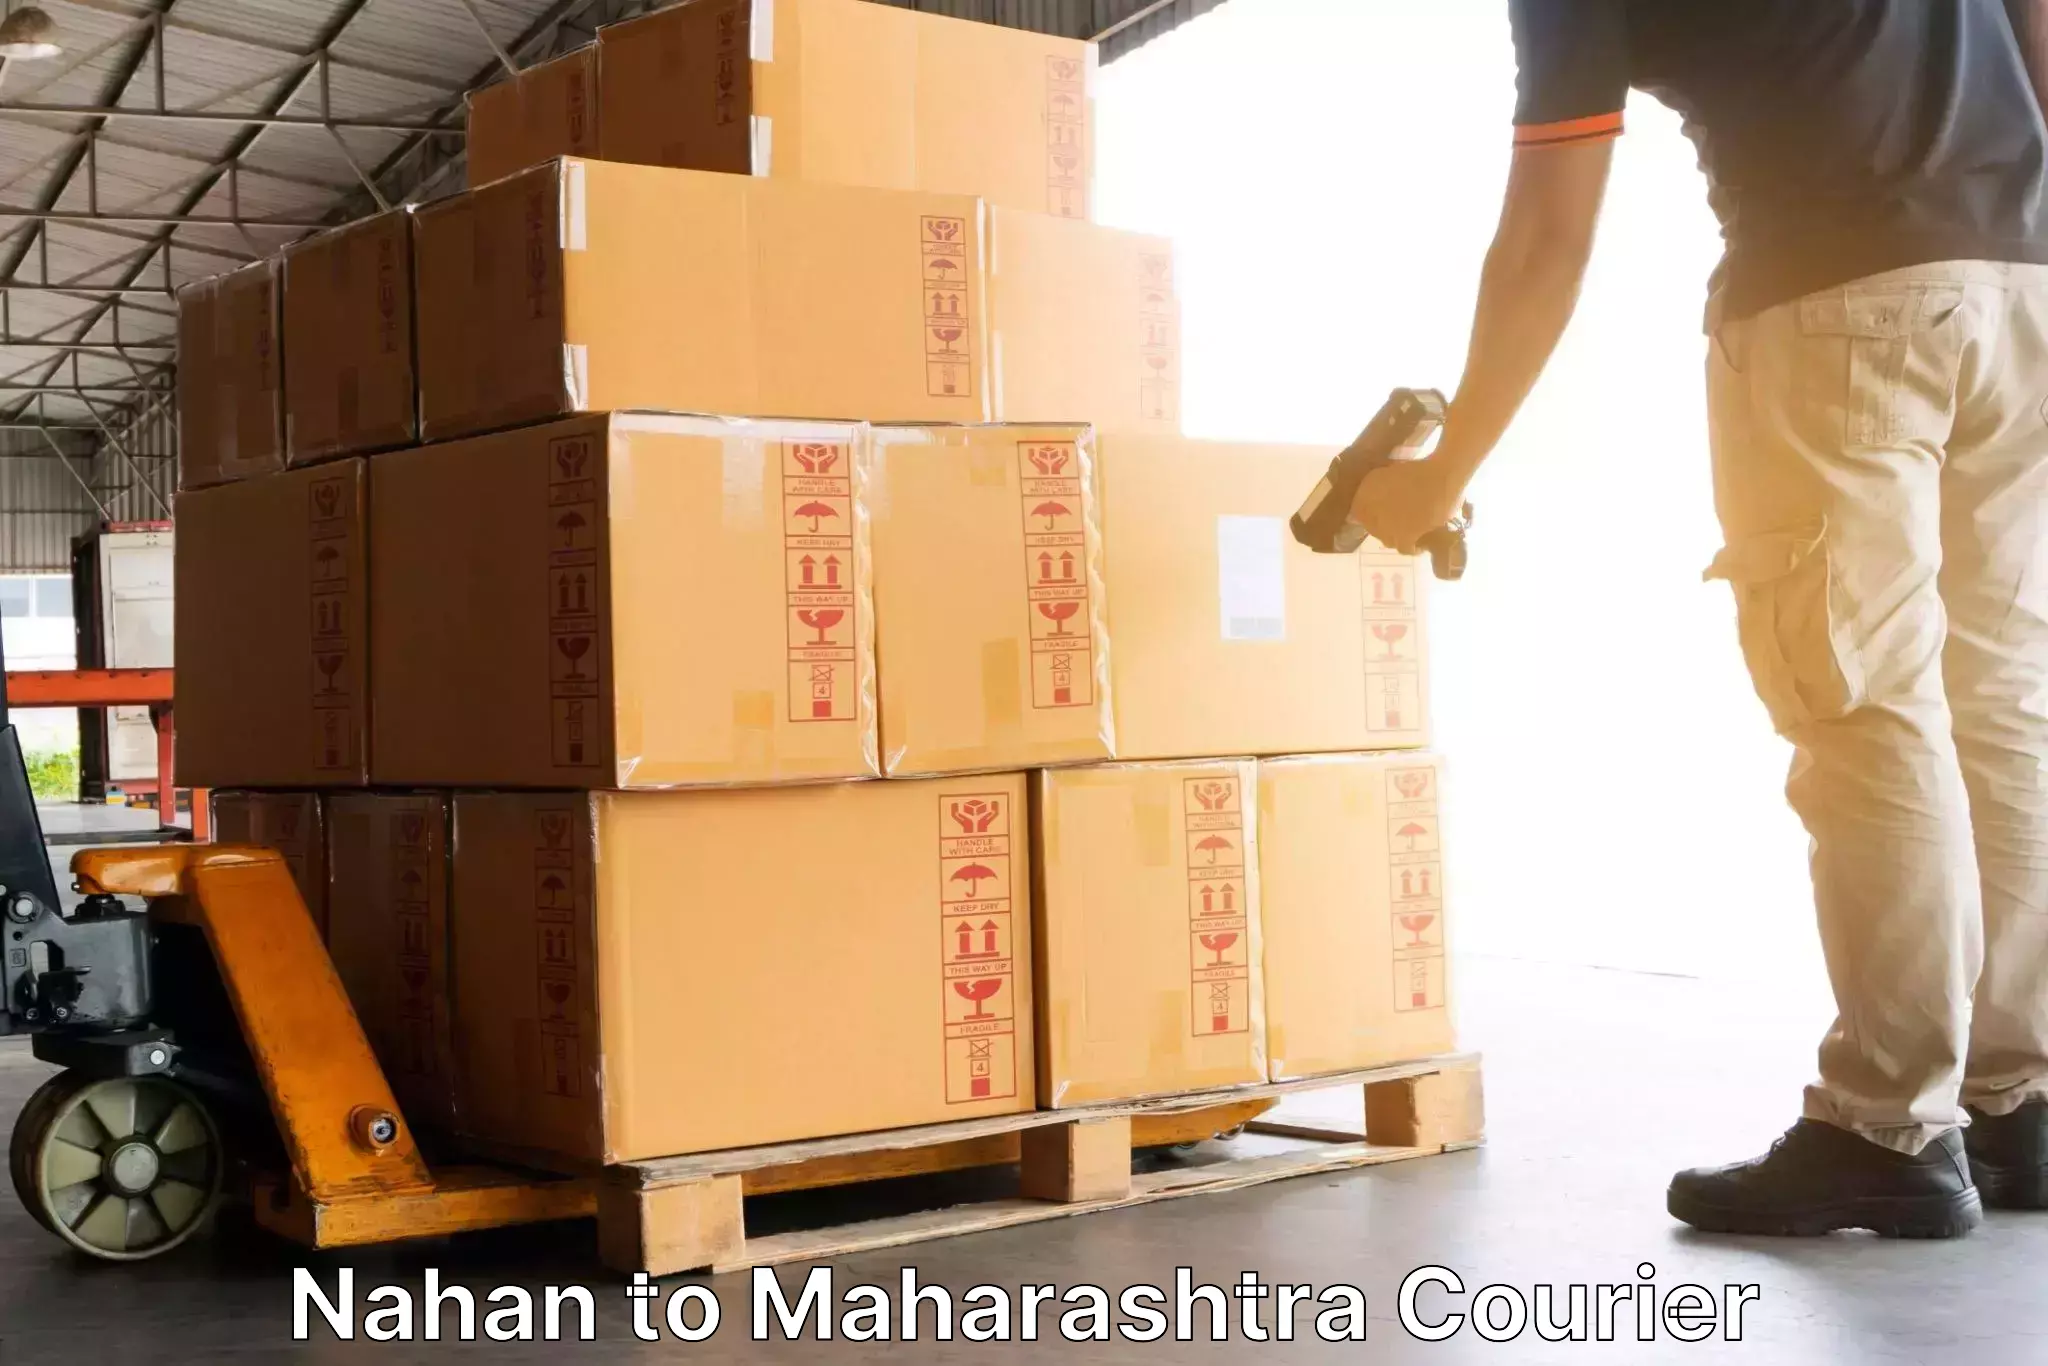 Seamless shipping experience Nahan to Dhule